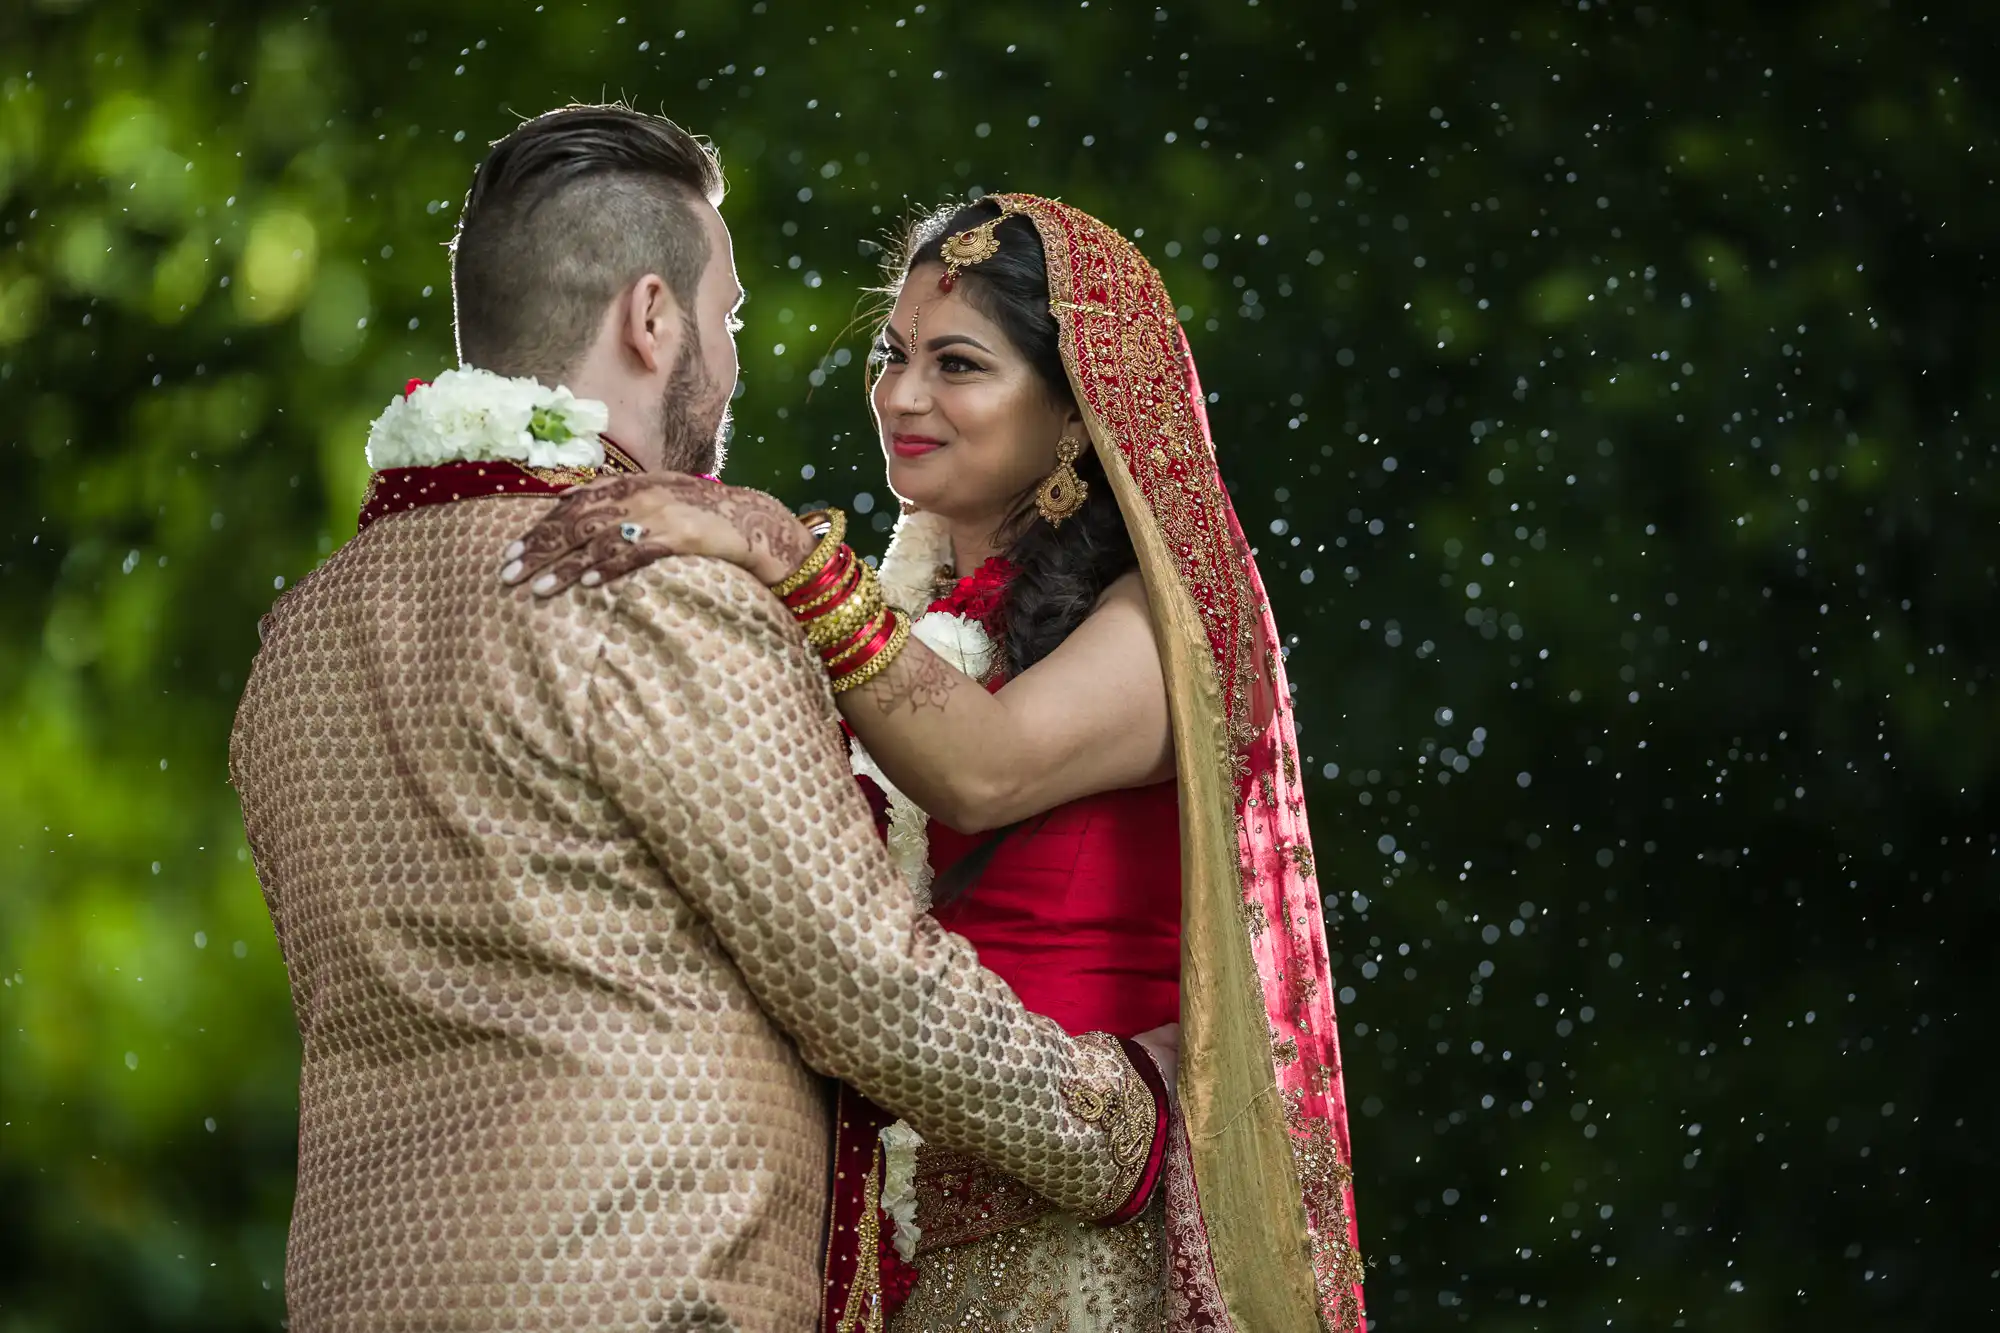 A couple dressed in traditional attire, with the woman wearing a red and gold outfit and veil, look at each other lovingly while standing outdoors with greenery and raindrops in the background.